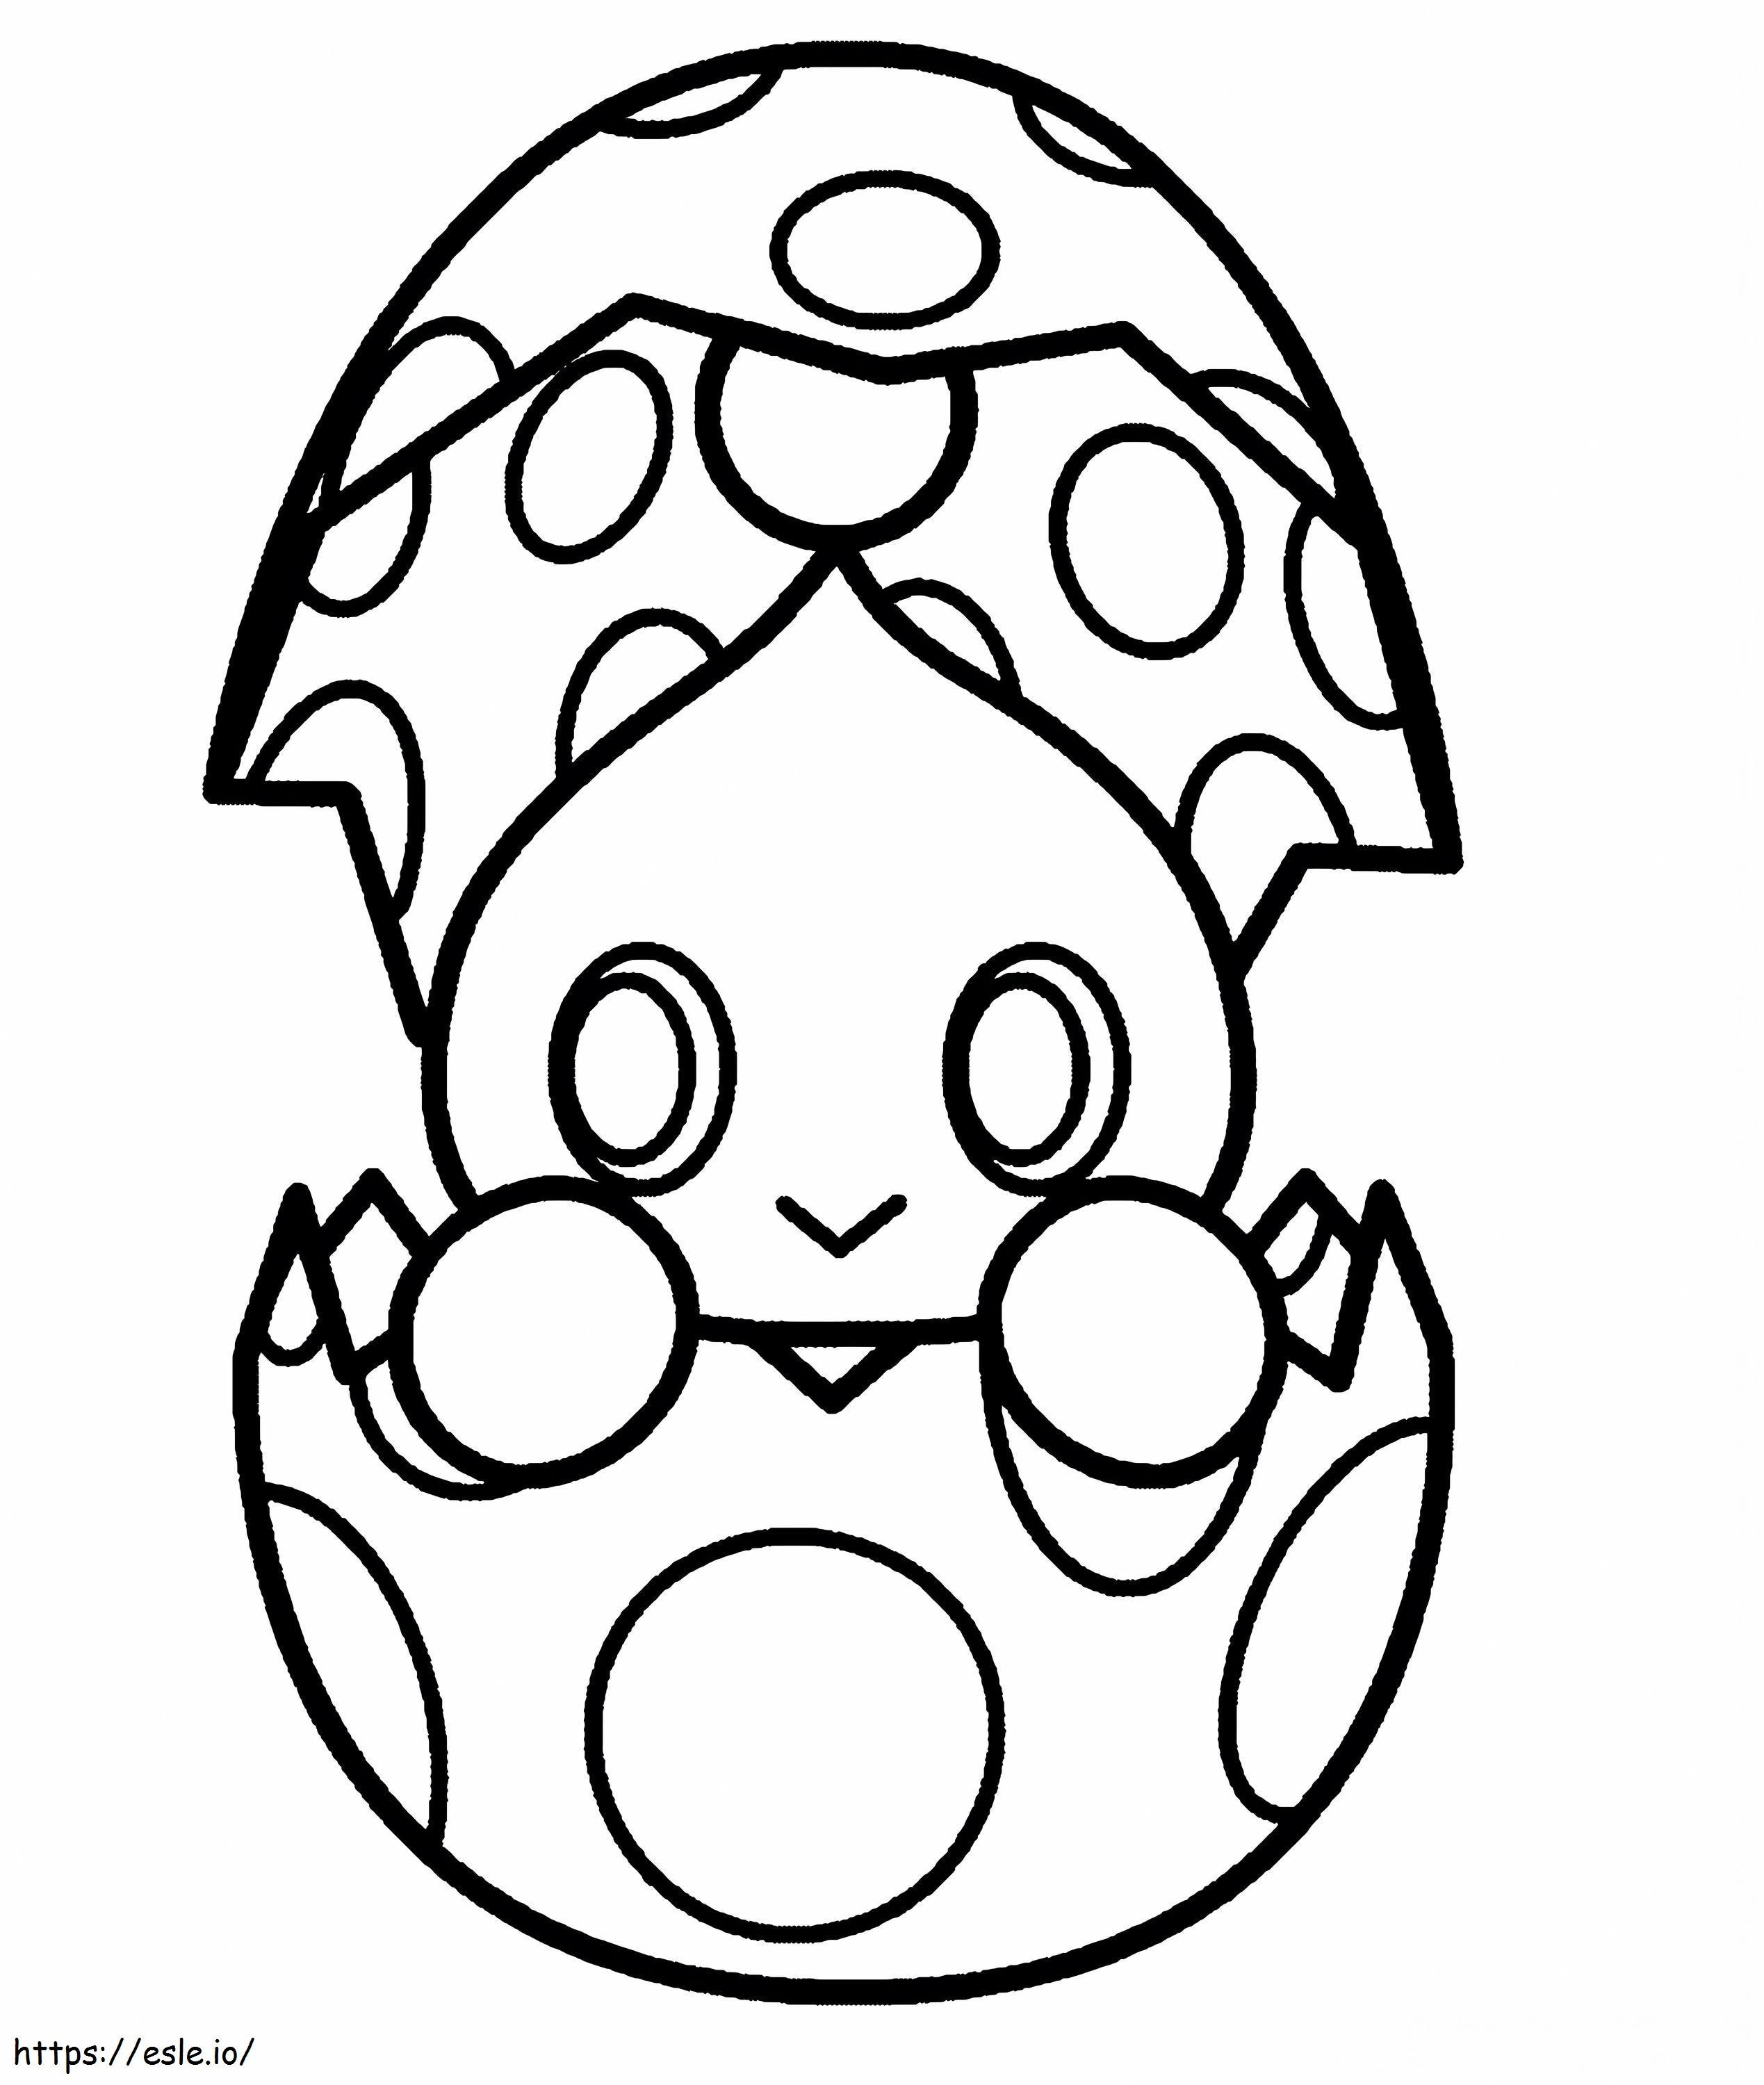 1433776934 7 coloring page